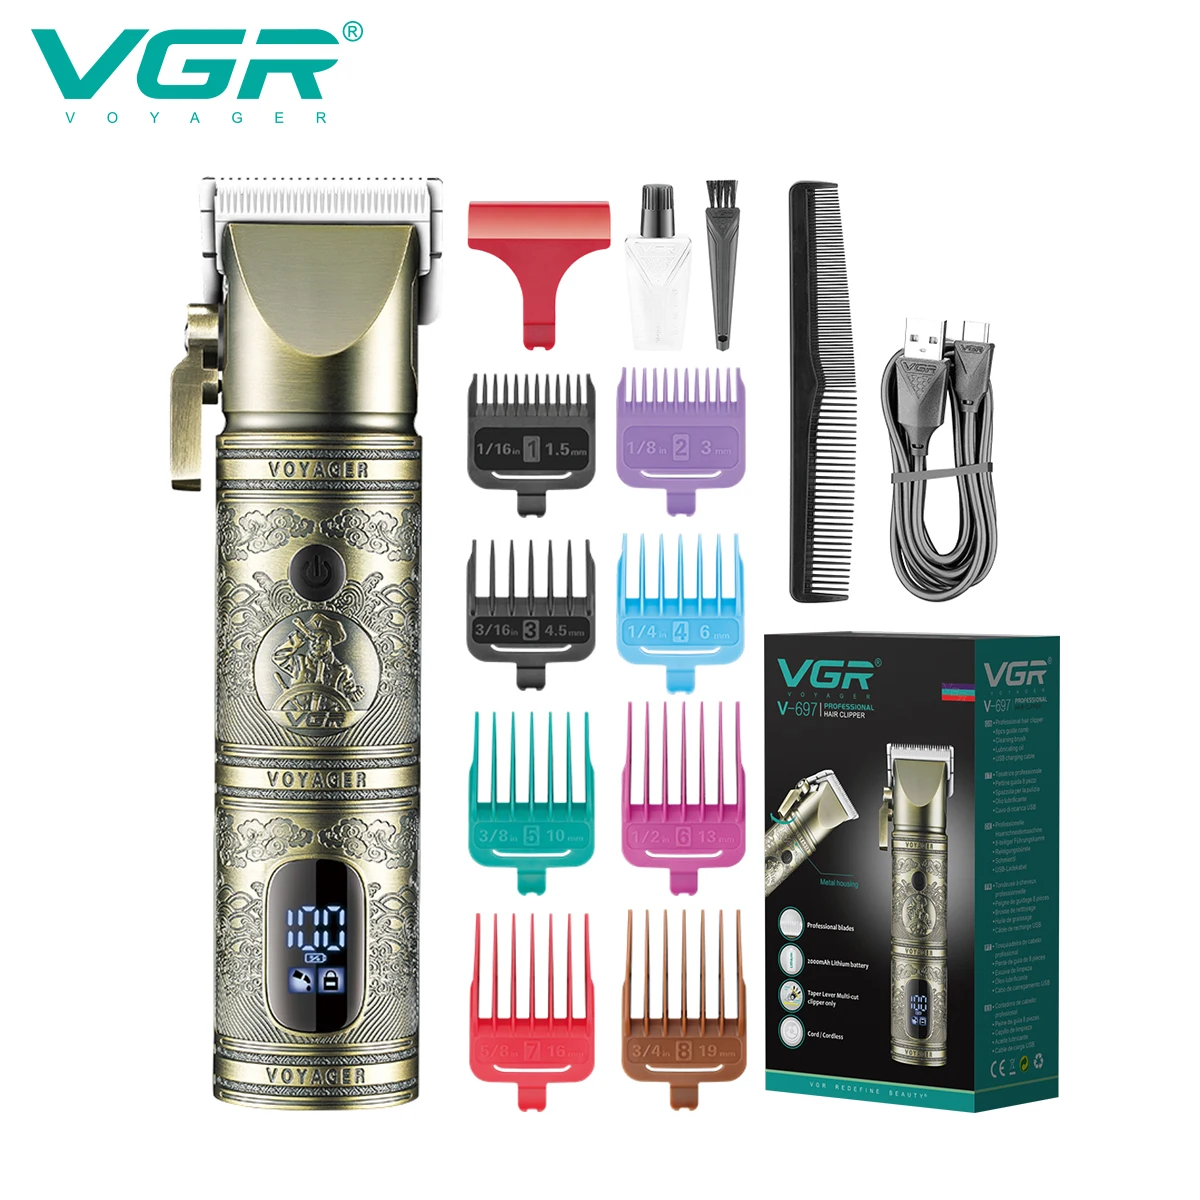 VGR Hair Clipper Professional Hair Trimmer LED Display Hair Cutting Machine Adjustable T9 Rechargeable Trimmer for Men V-697